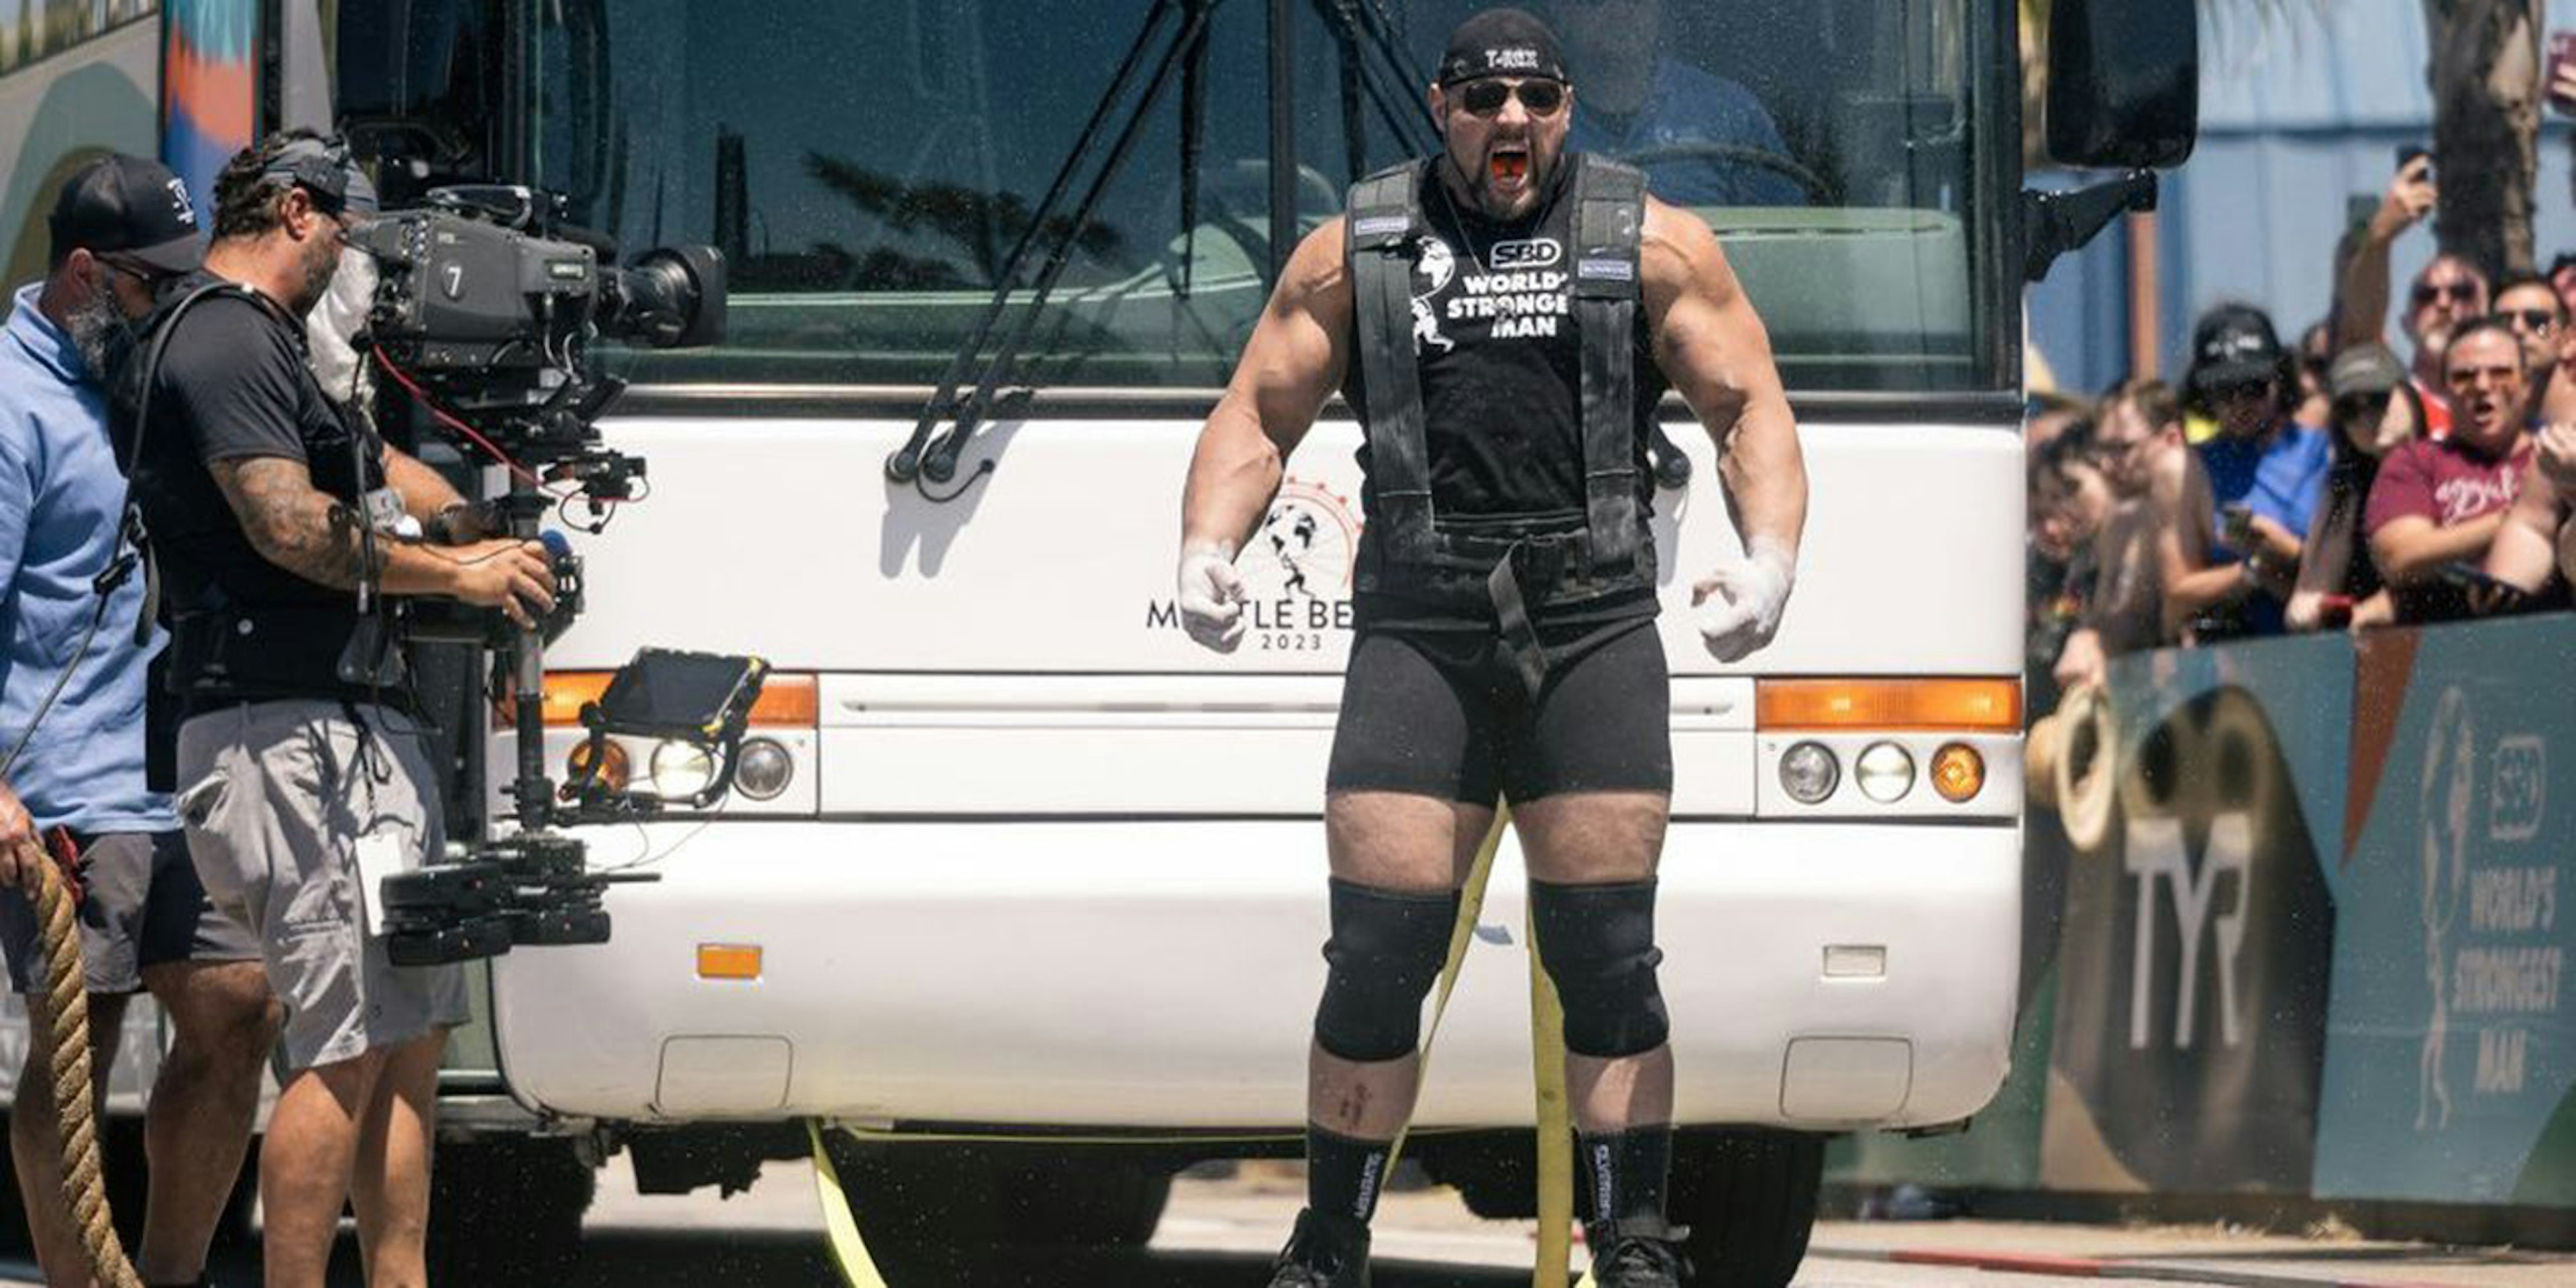 The World’s Strongest Man Competition